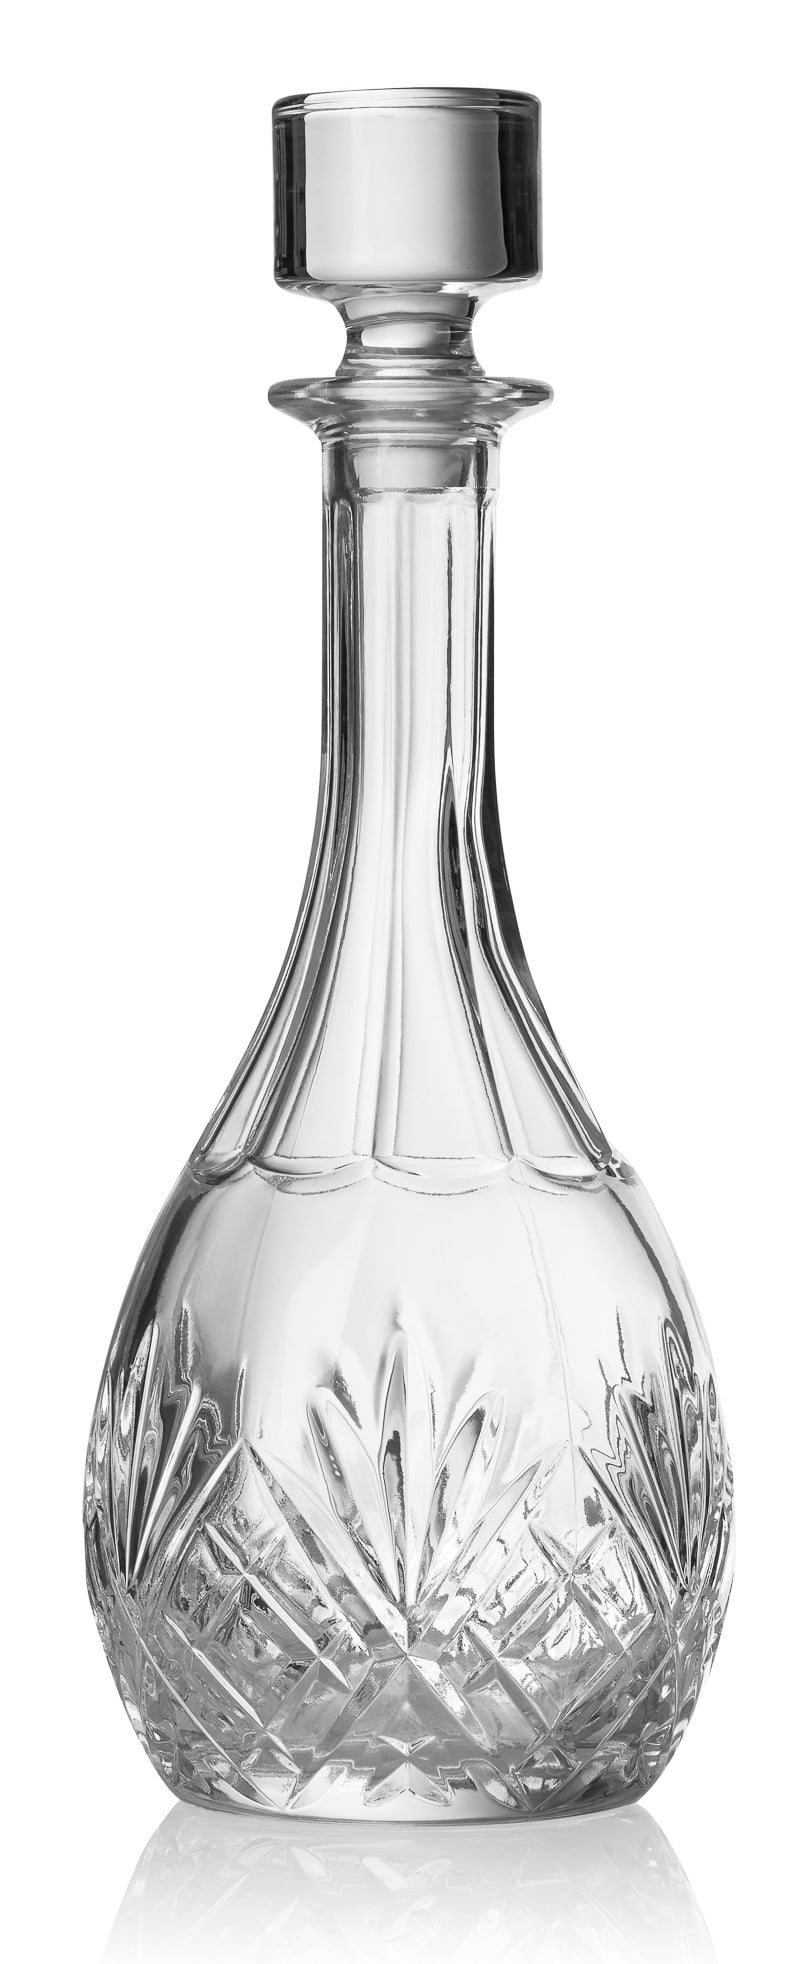 Superb crystal decanter with 4 wine stems square cut crystal